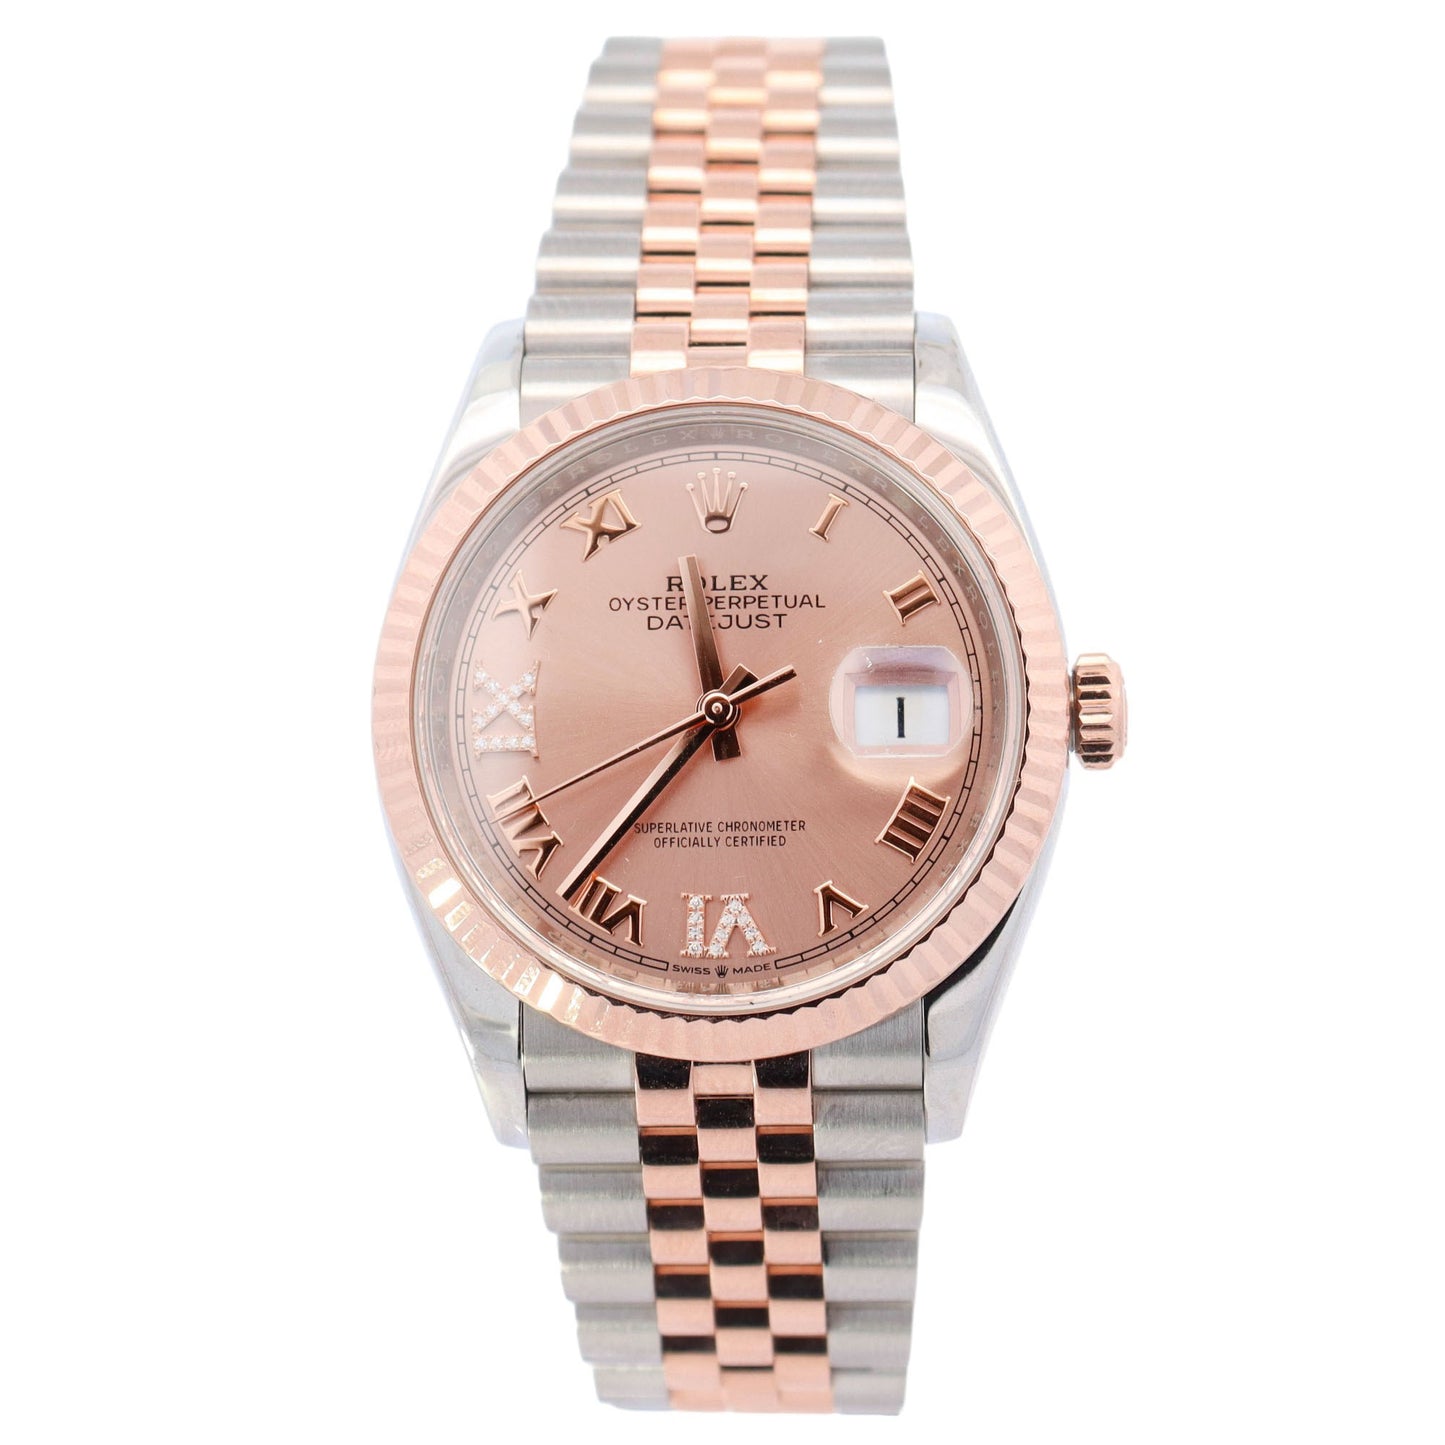 Rolex Datejust Two-Tone Stainles Steel & Rose Gold 36mm Pink Roman Dial Watch Reference# 126231 - Happy Jewelers Fine Jewelry Lifetime Warranty